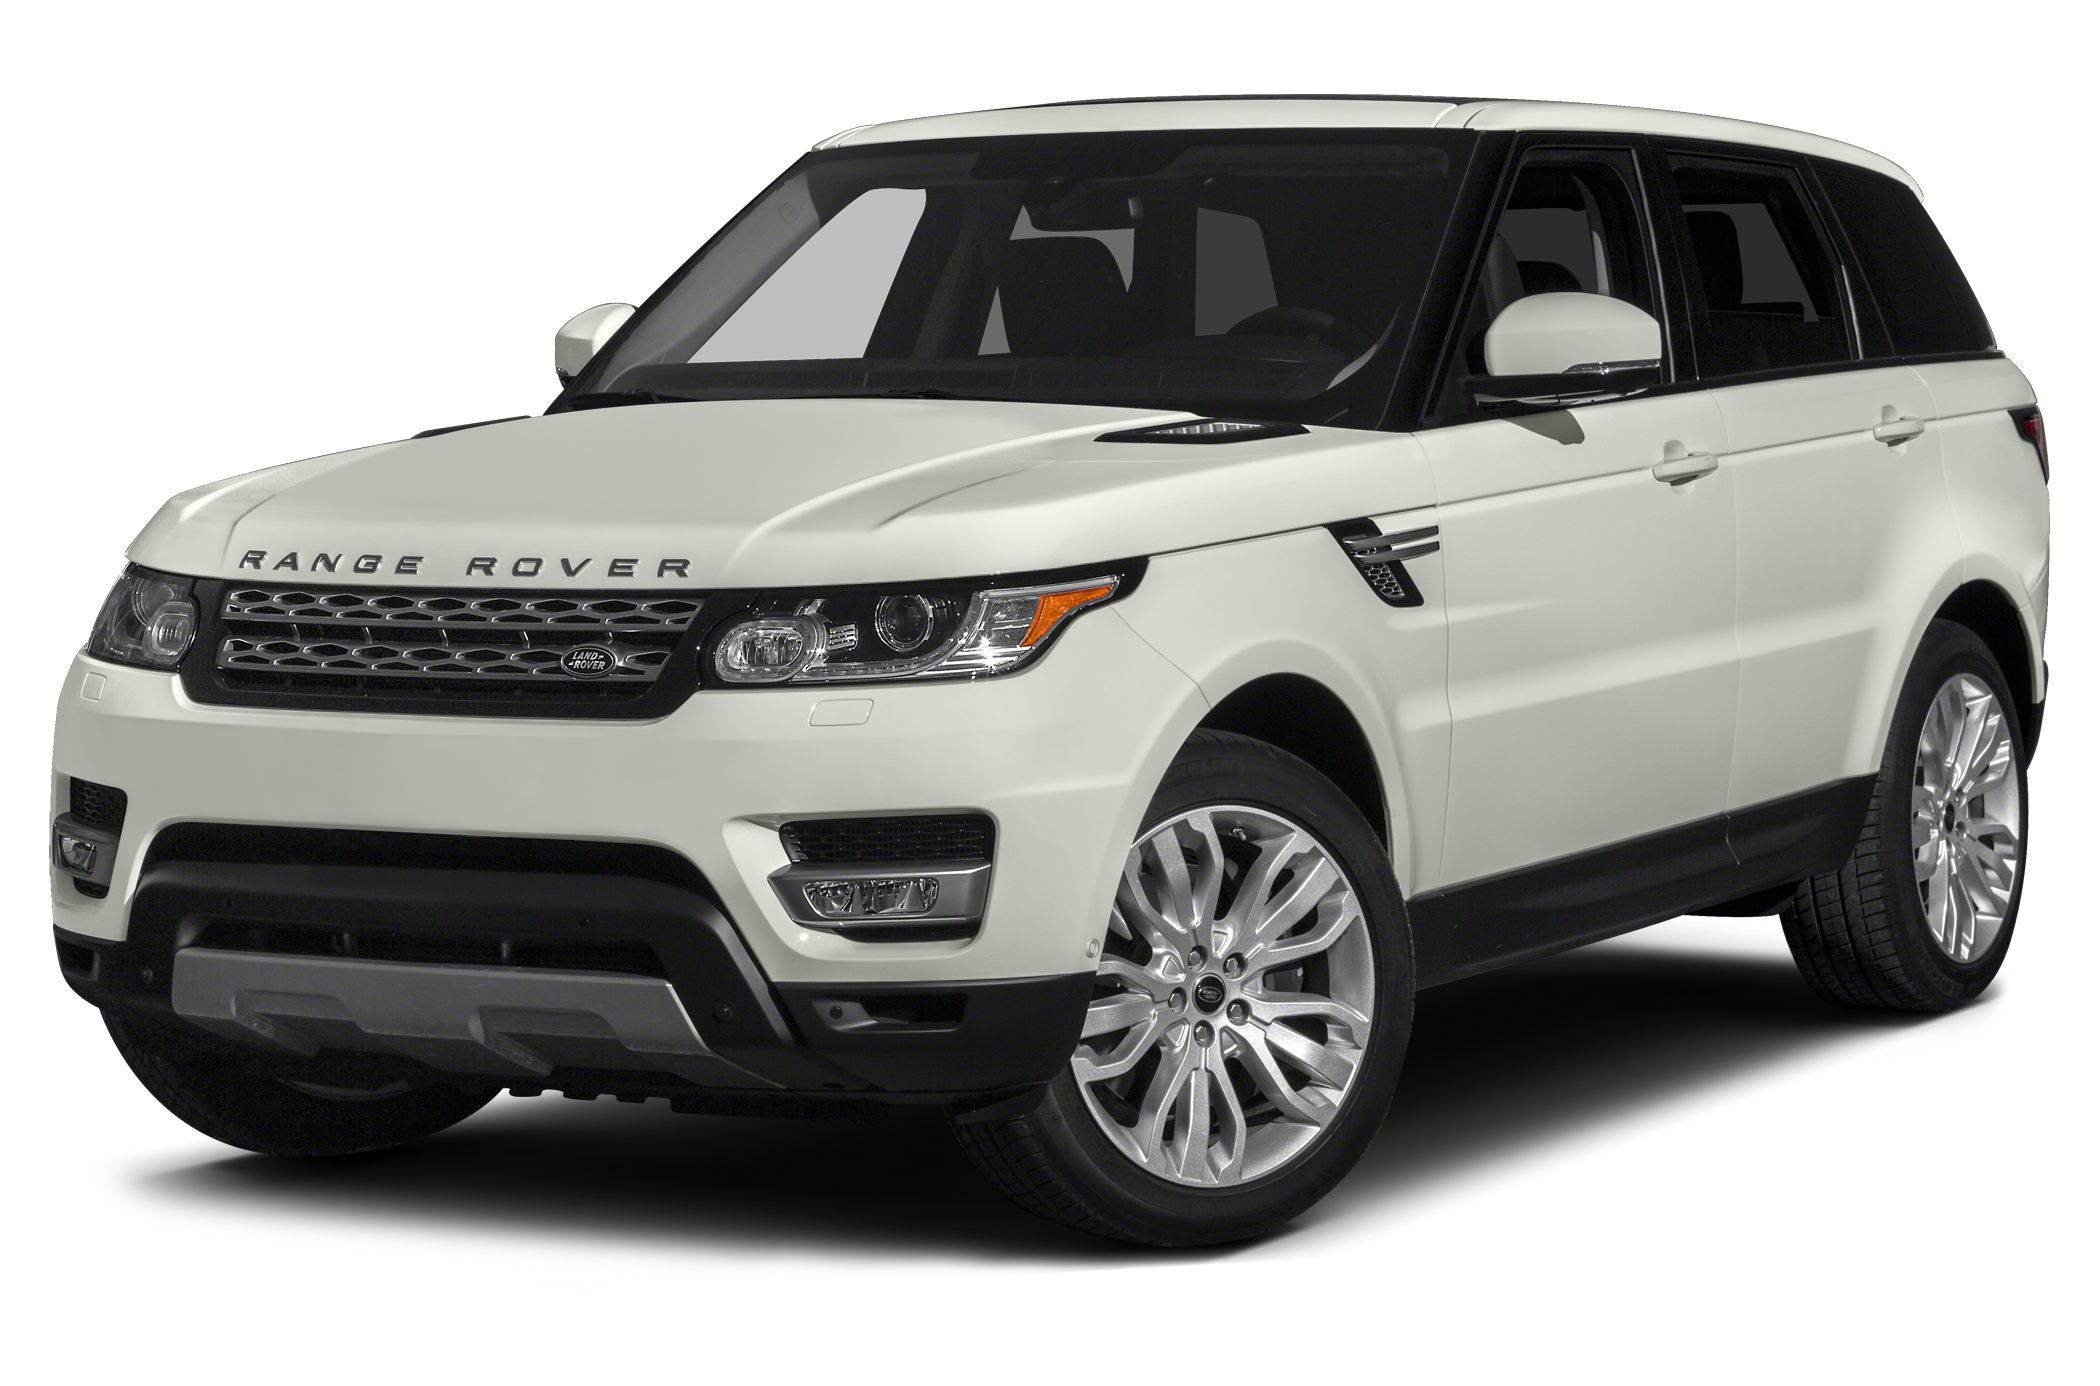 2015 Land Rover Range Rover Sport 5 0l V8 Supercharged Autobiography 4dr 4x4 Pictures